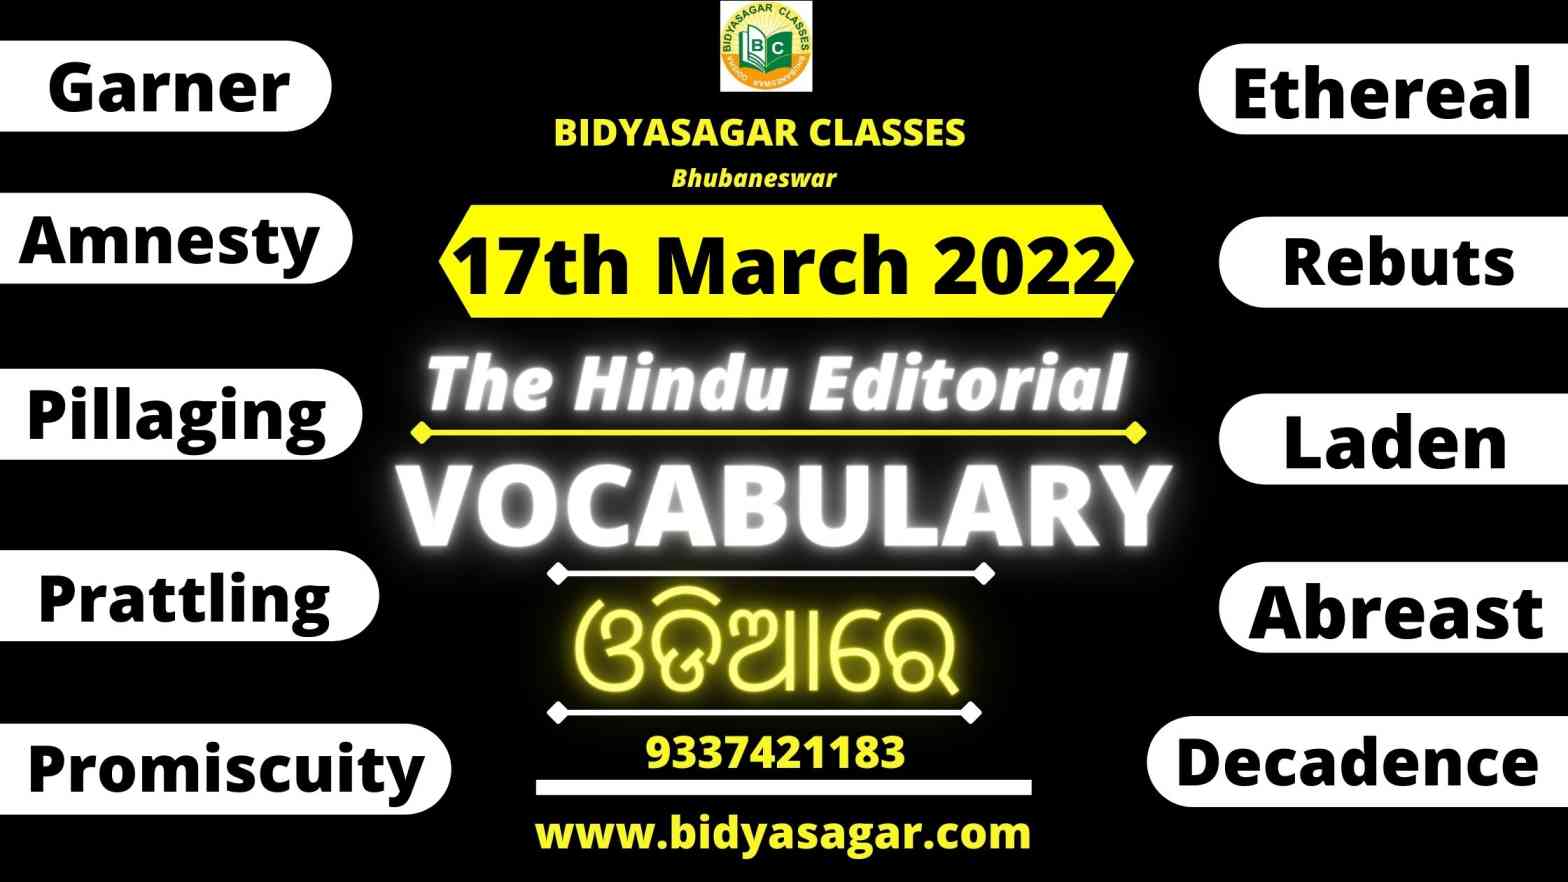 The Hindu Editorial Vocabulary of 17th March 2022